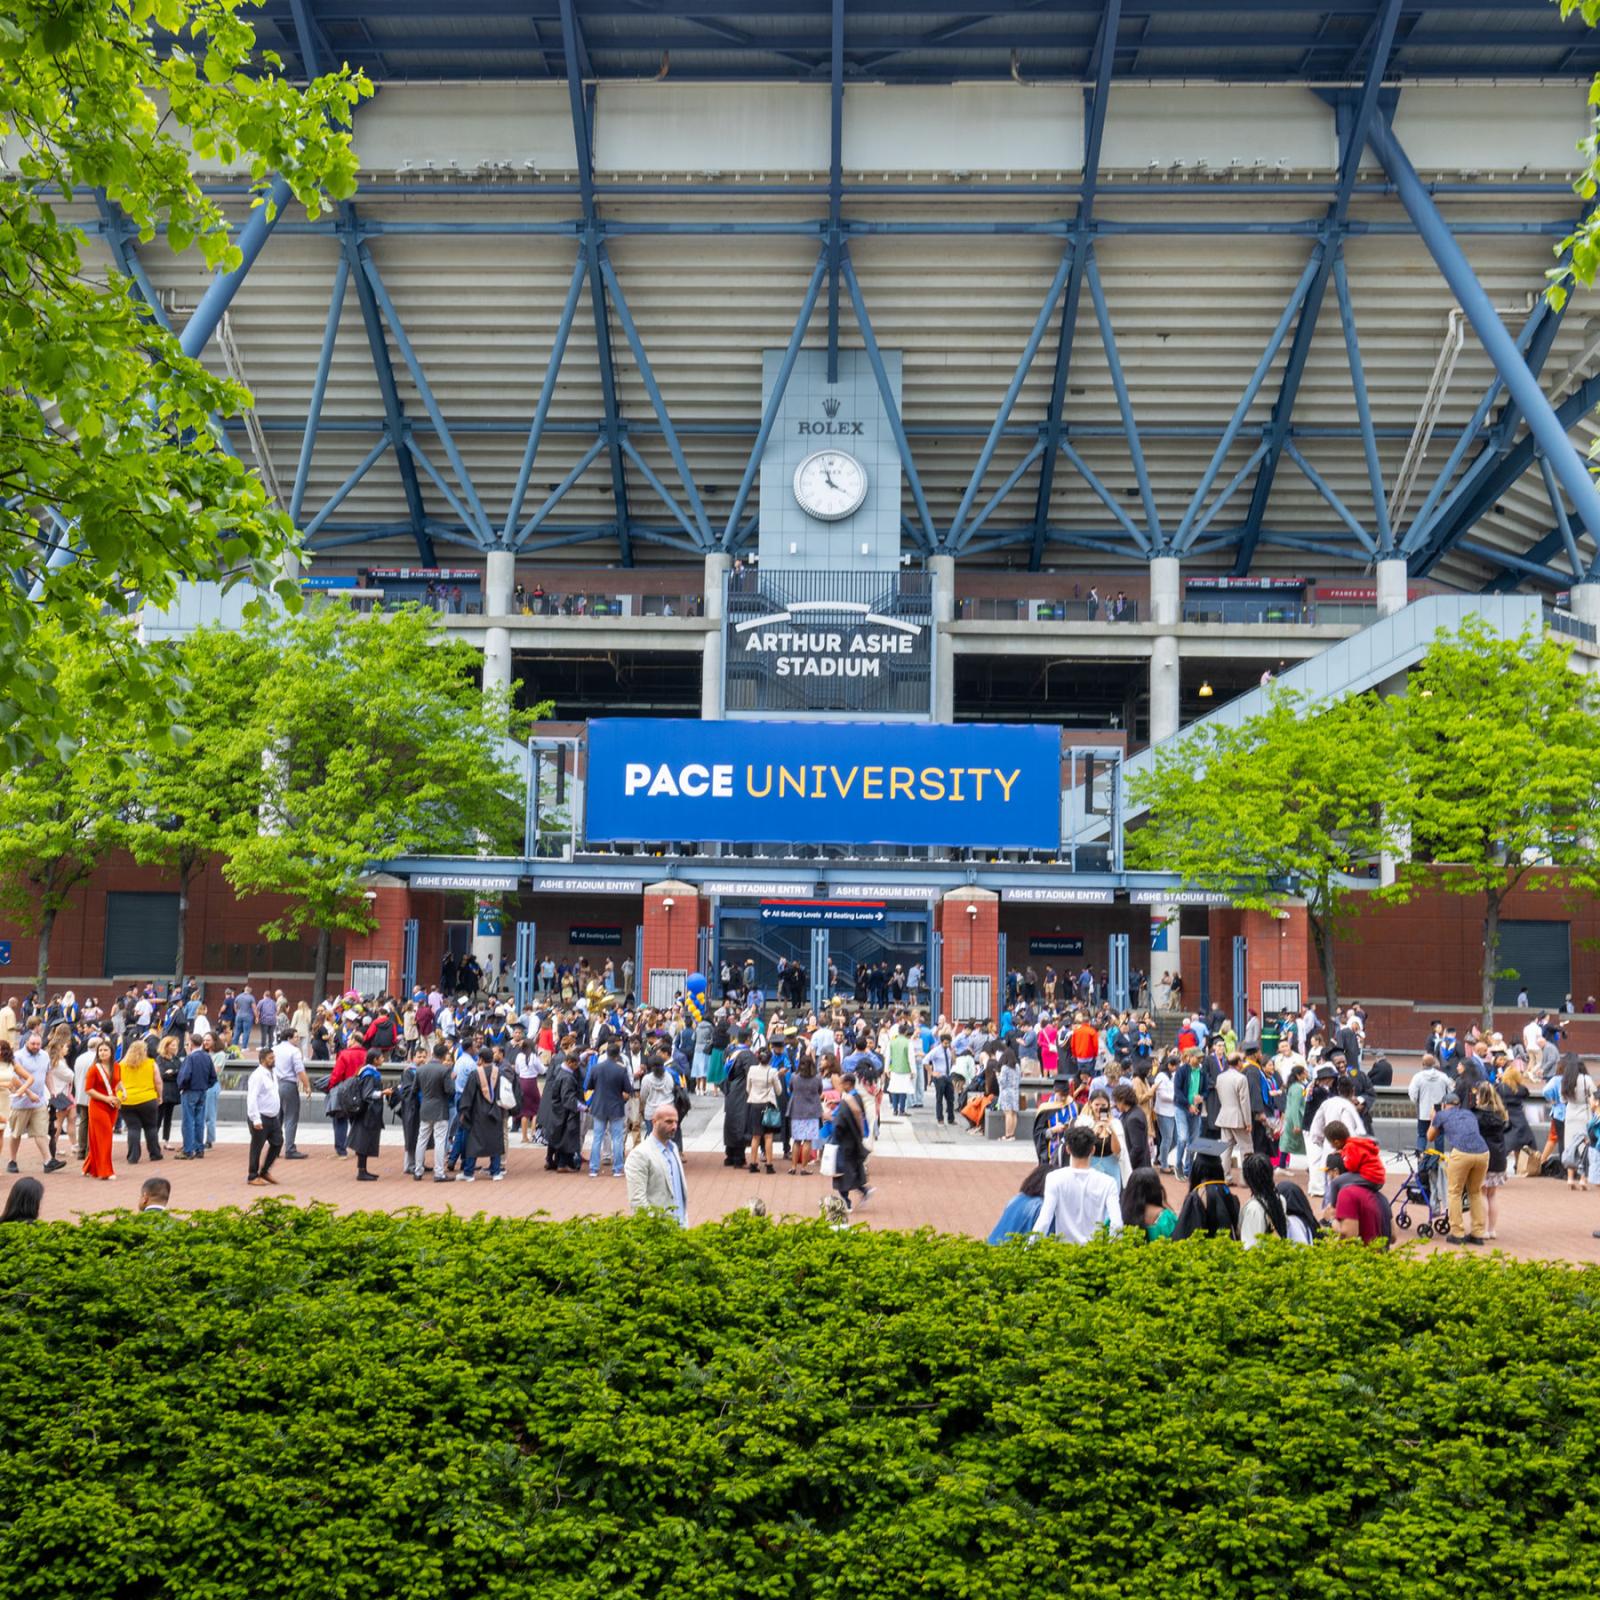 Pace University students and families arriving at the 2022 Commencement ceremonies.